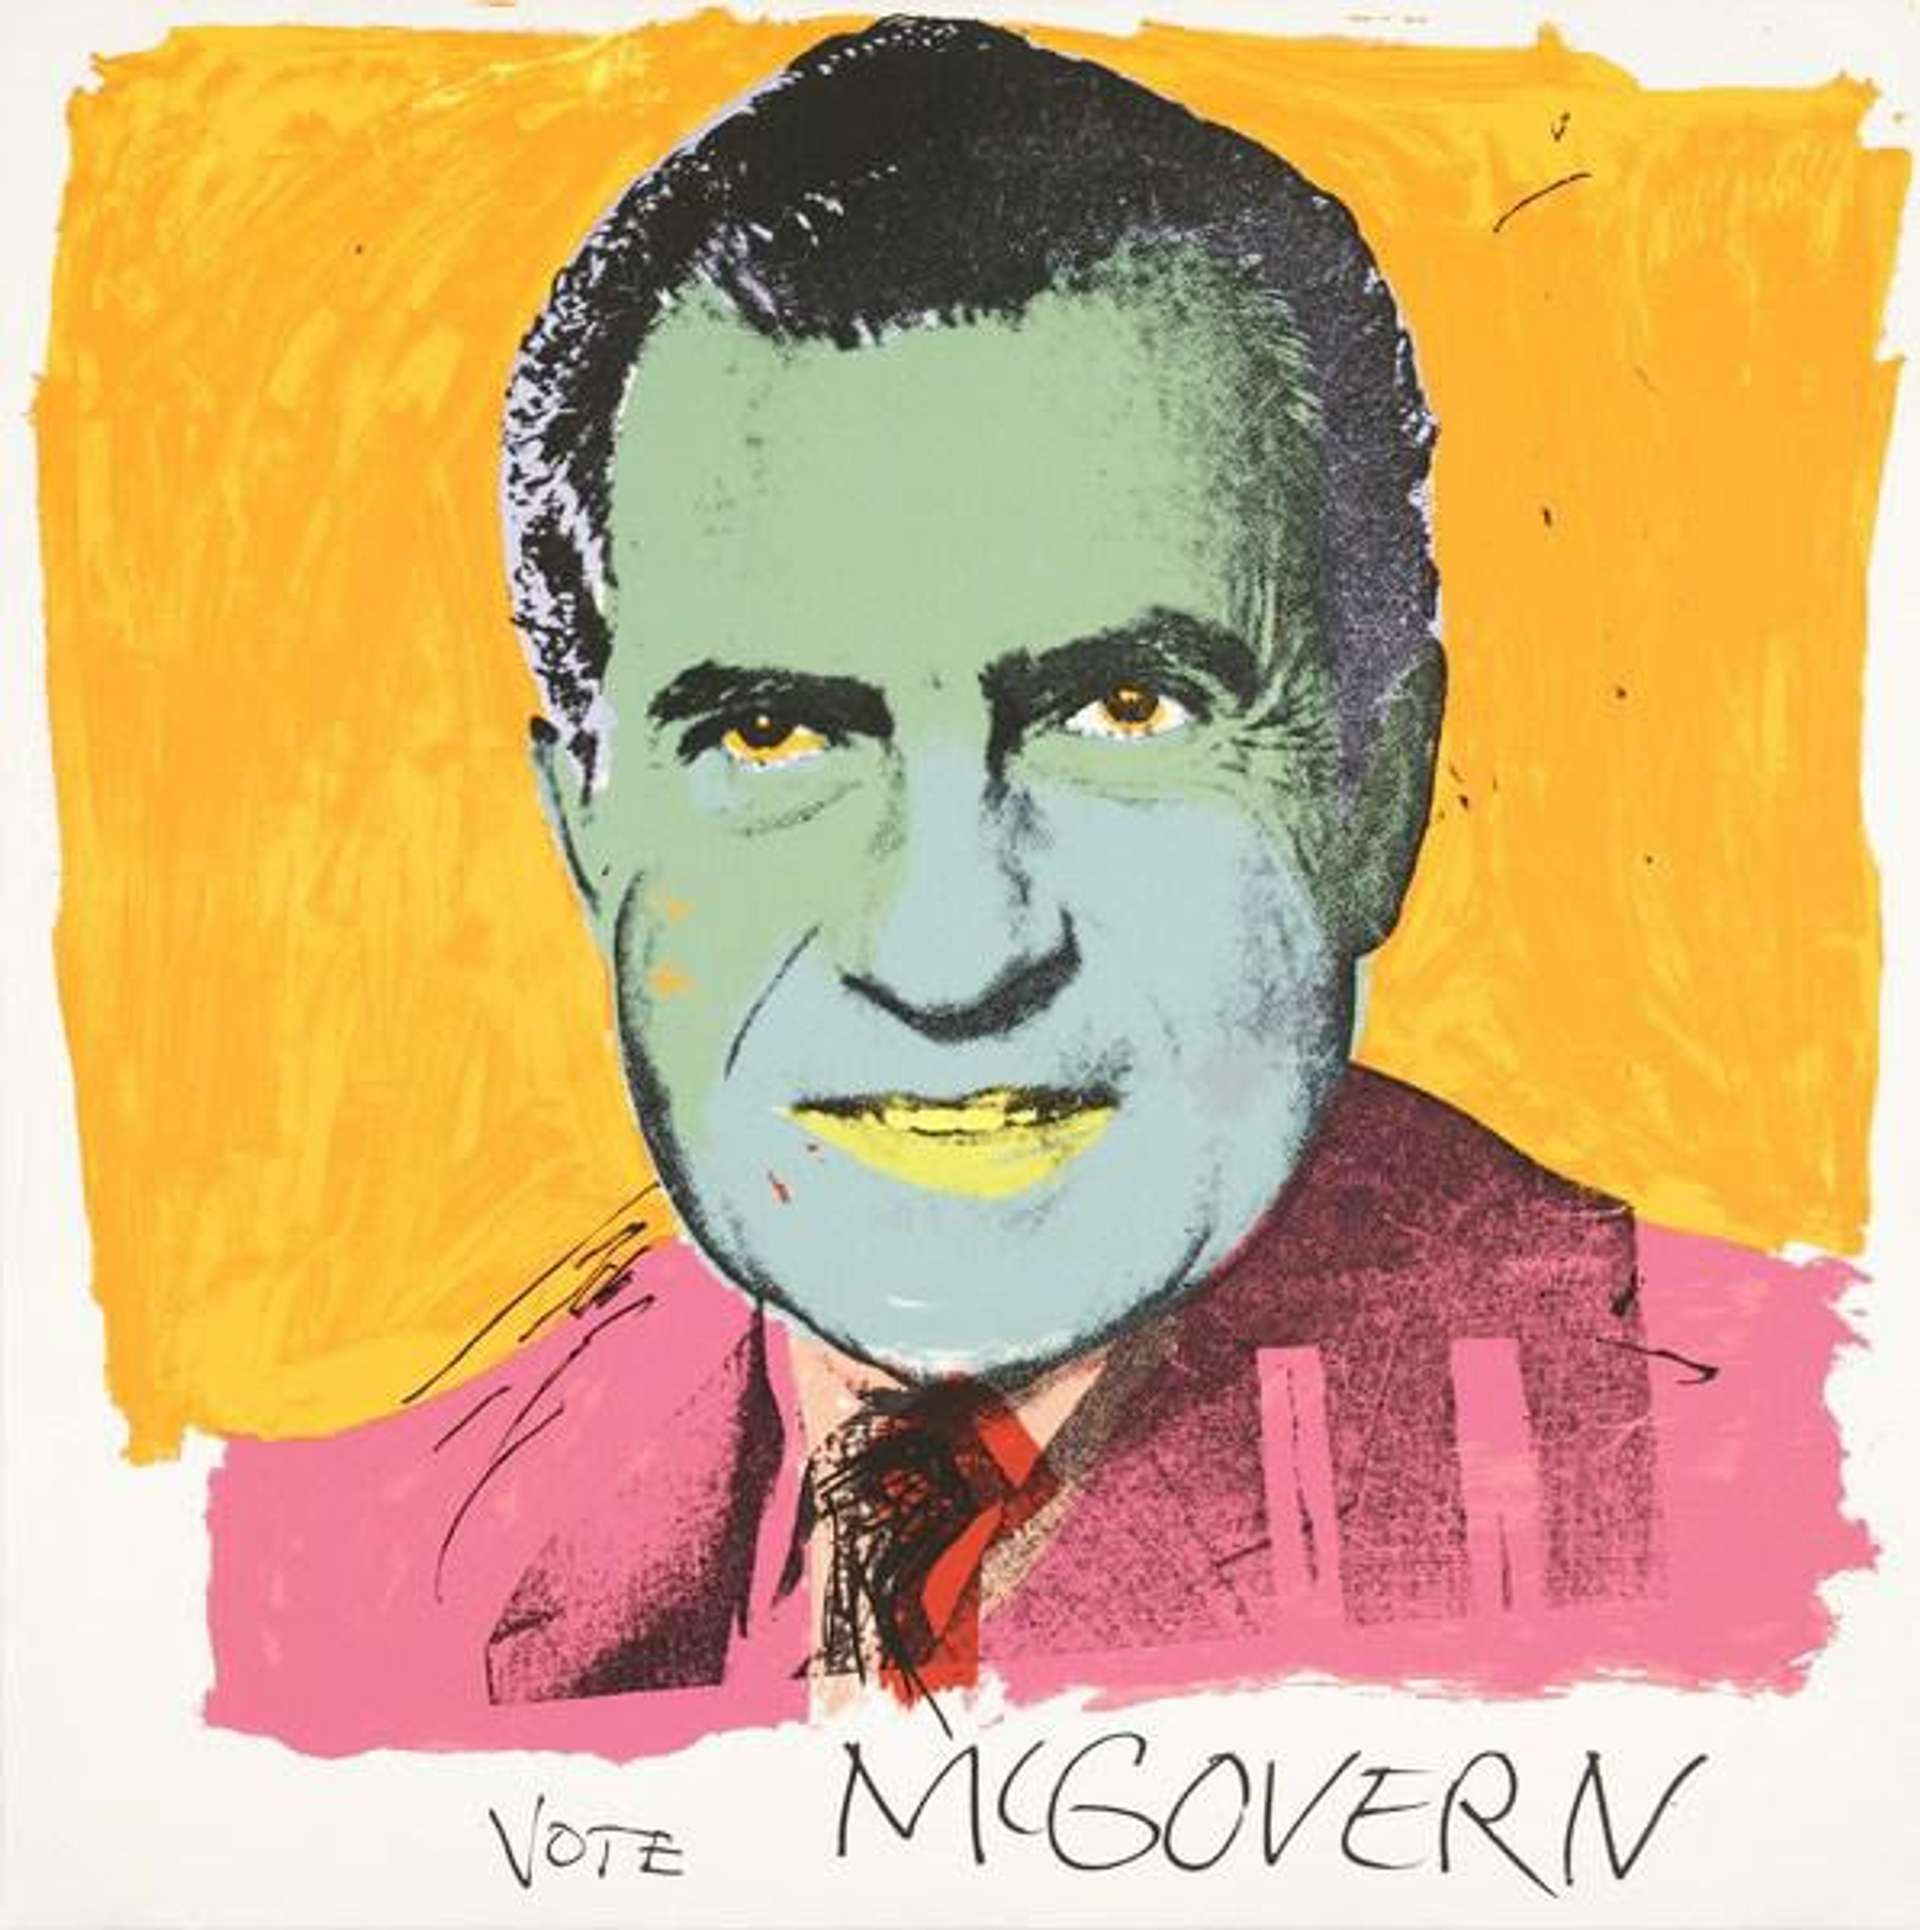 Vote Mcgovern (F. & S. II.84) - Signed Print by Andy Warhol 1972 - MyArtBroker